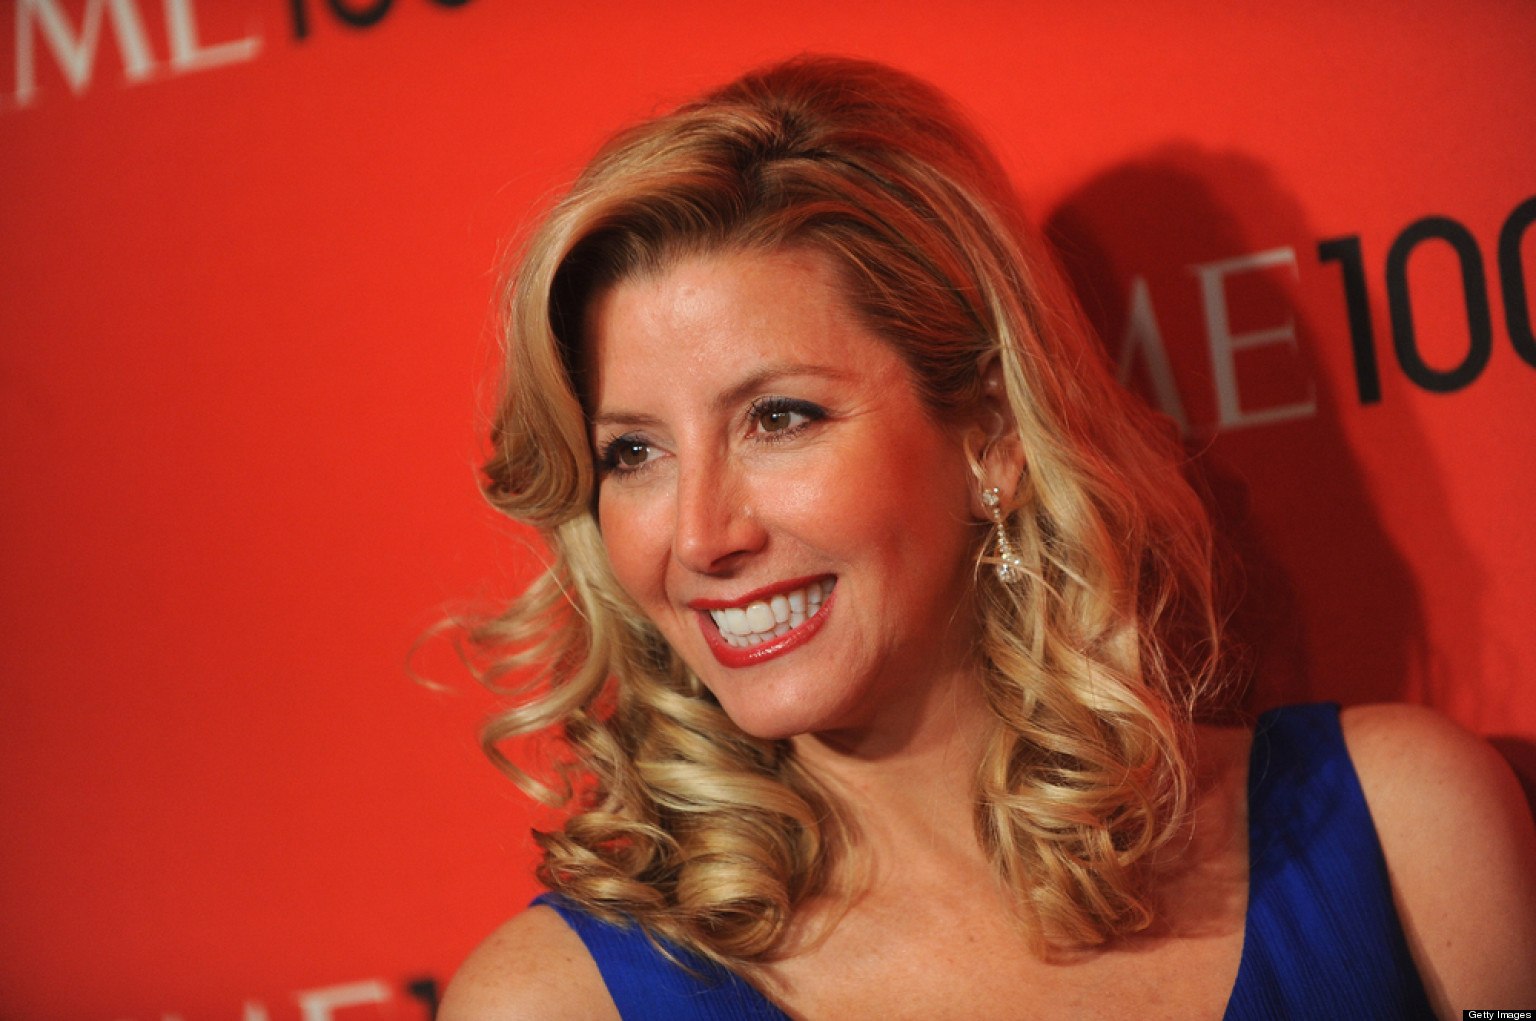 NEW YORK, NY - APRIL 24: Spanx inventor Sara Blakely attends the TIME 100 Gala celebrating TIME'S 100 Most Influential People In The World at Jazz at Lincoln Center on April 24, 2012 in New York City. (Photo by Fernando Leon/Getty Images for TIME)